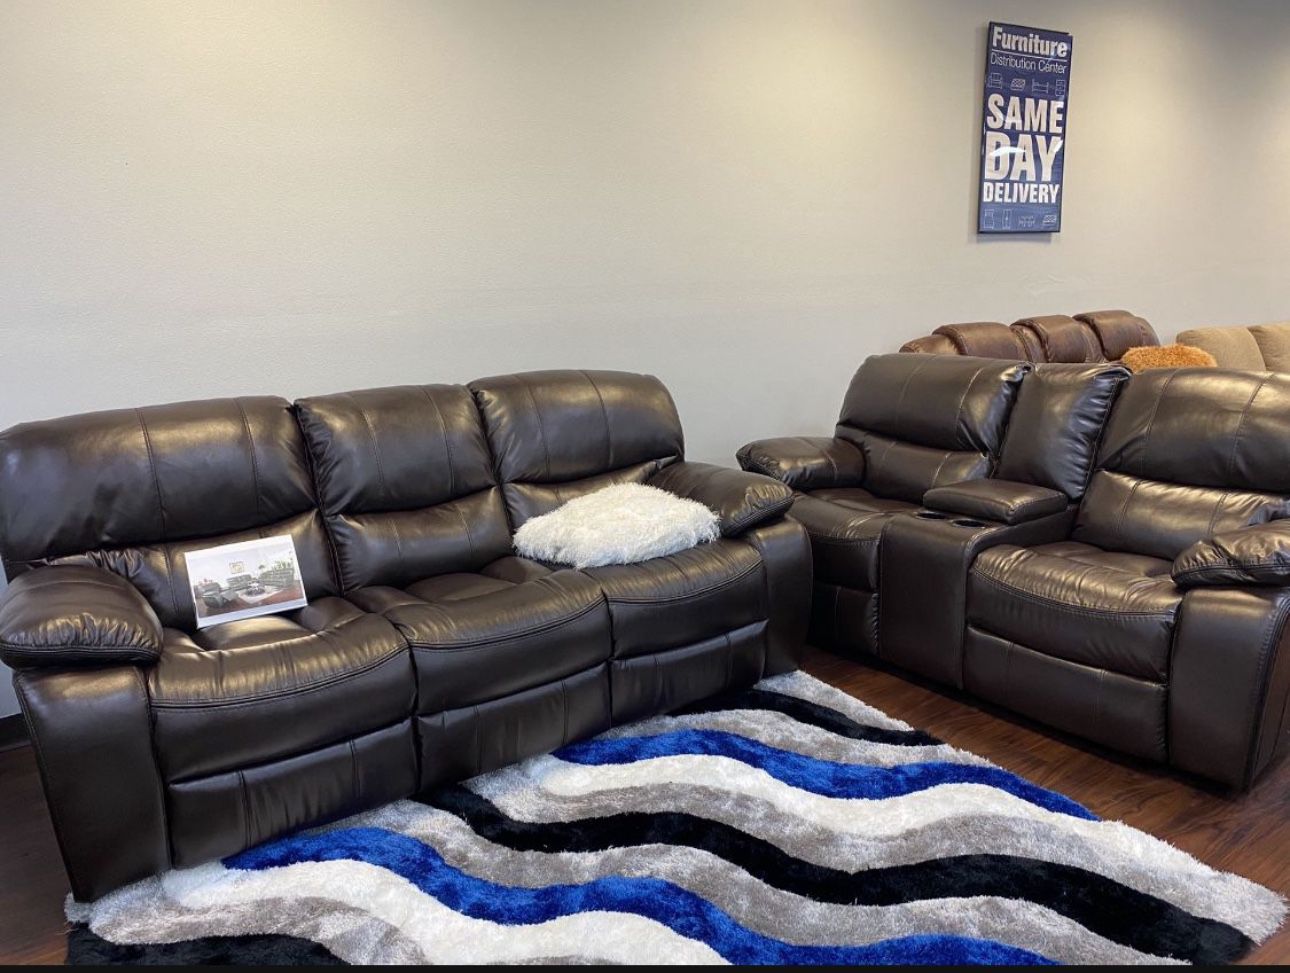 COMFY NEW MADRID RECLINING SOFA AND LOVESEAT SET ON SALE ONLY $899. IN STOCK SAME DAY DELIVERY 🚚 EASY FINANCING 